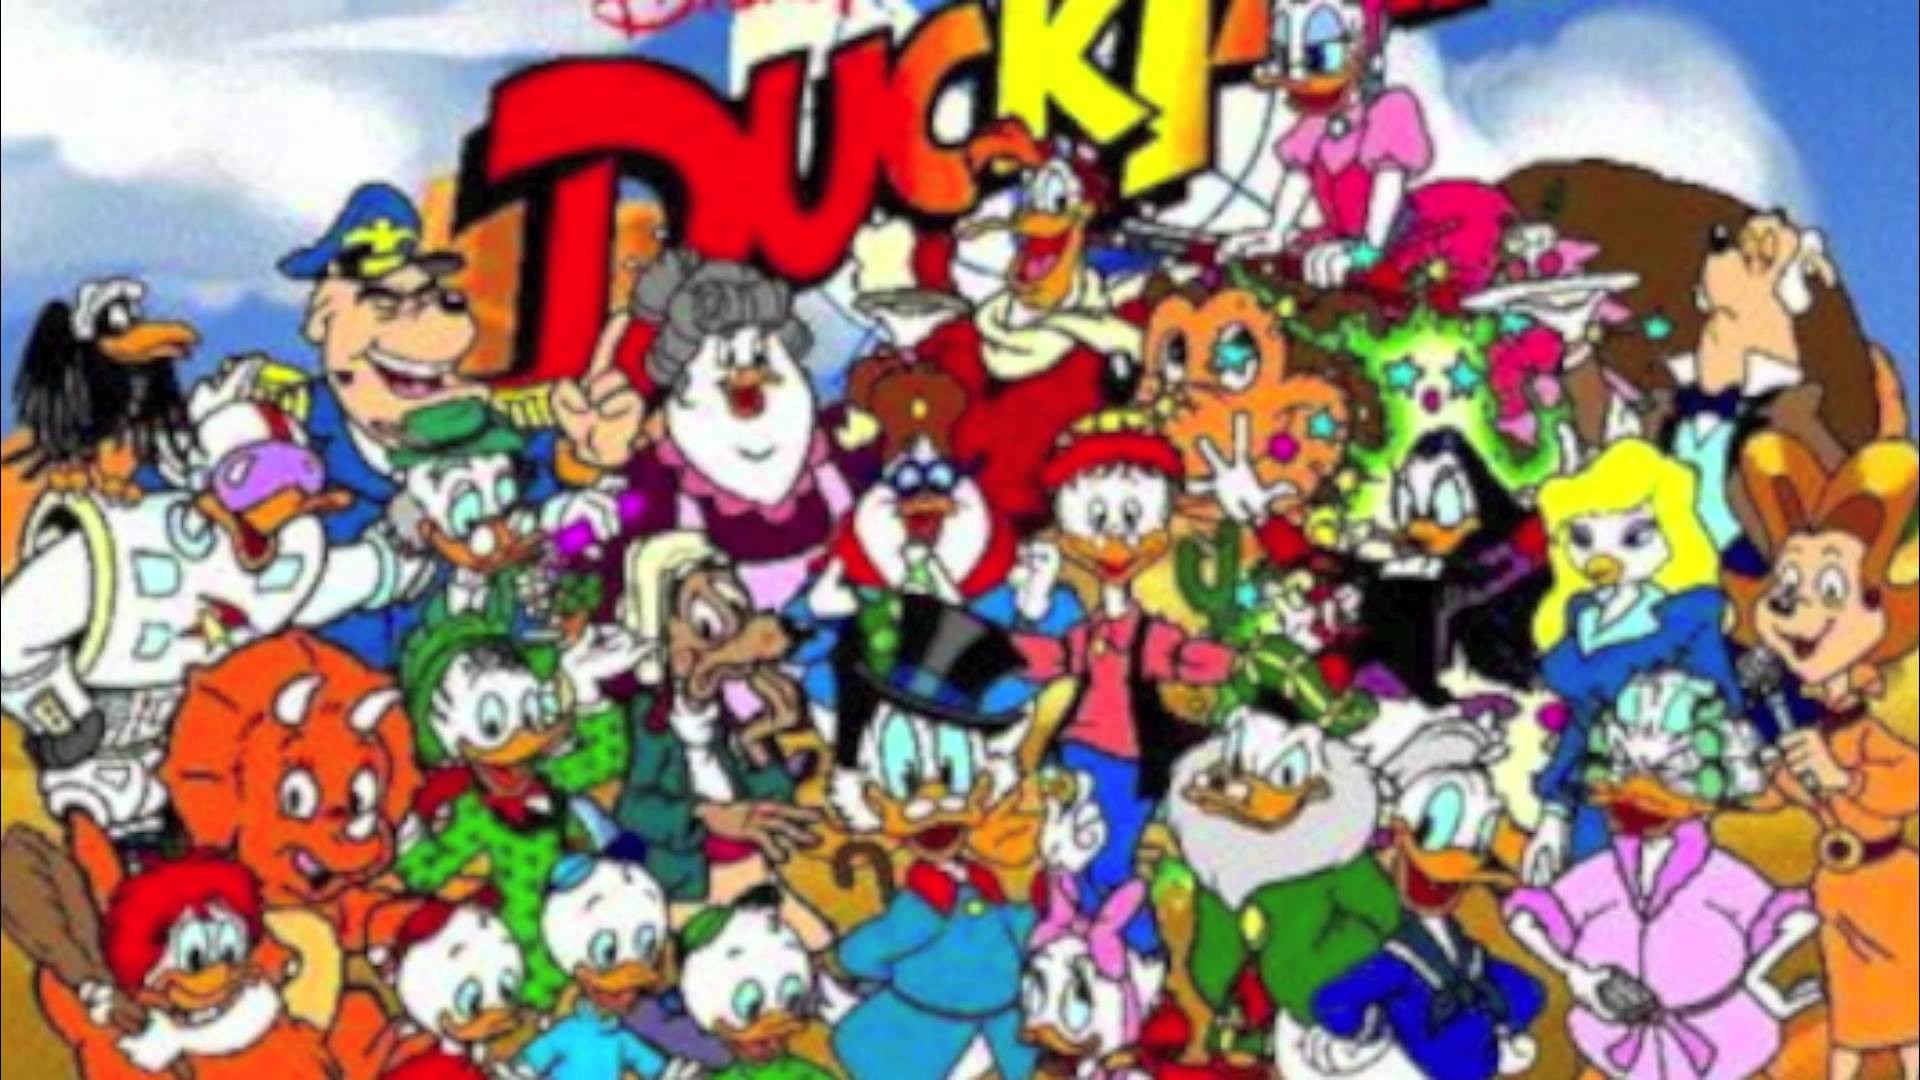 1920x1080 DuckTales Intro Cover - YouTube